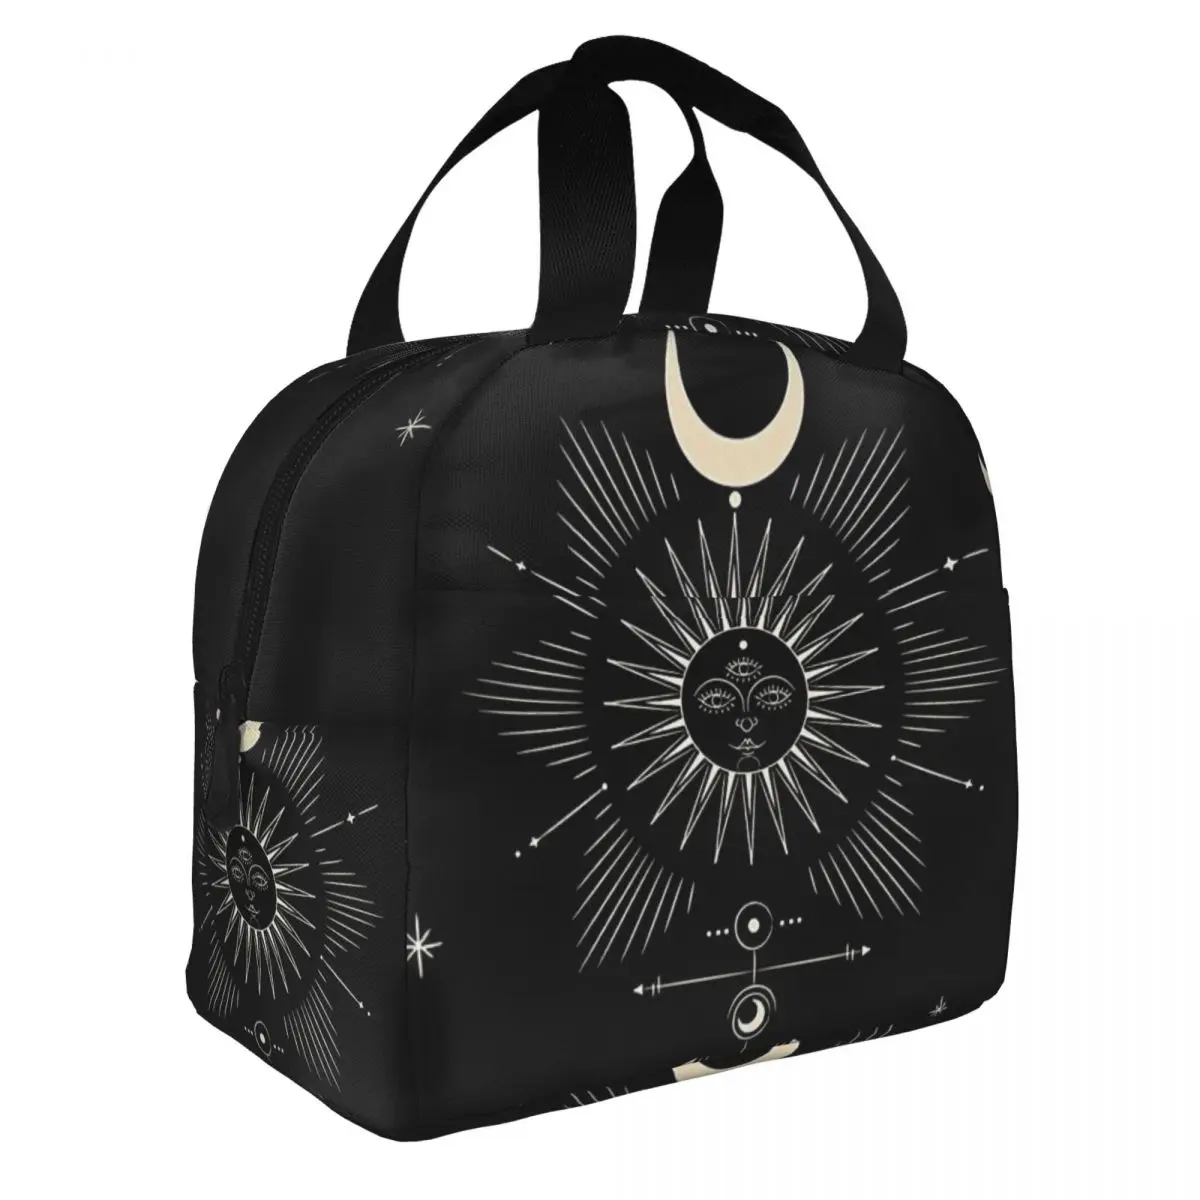 Tarot  Sun & Moon Lunch Bento Bags Portable Aluminum Foil thickened Thermal Cloth Lunch Bag for Women Men Boy